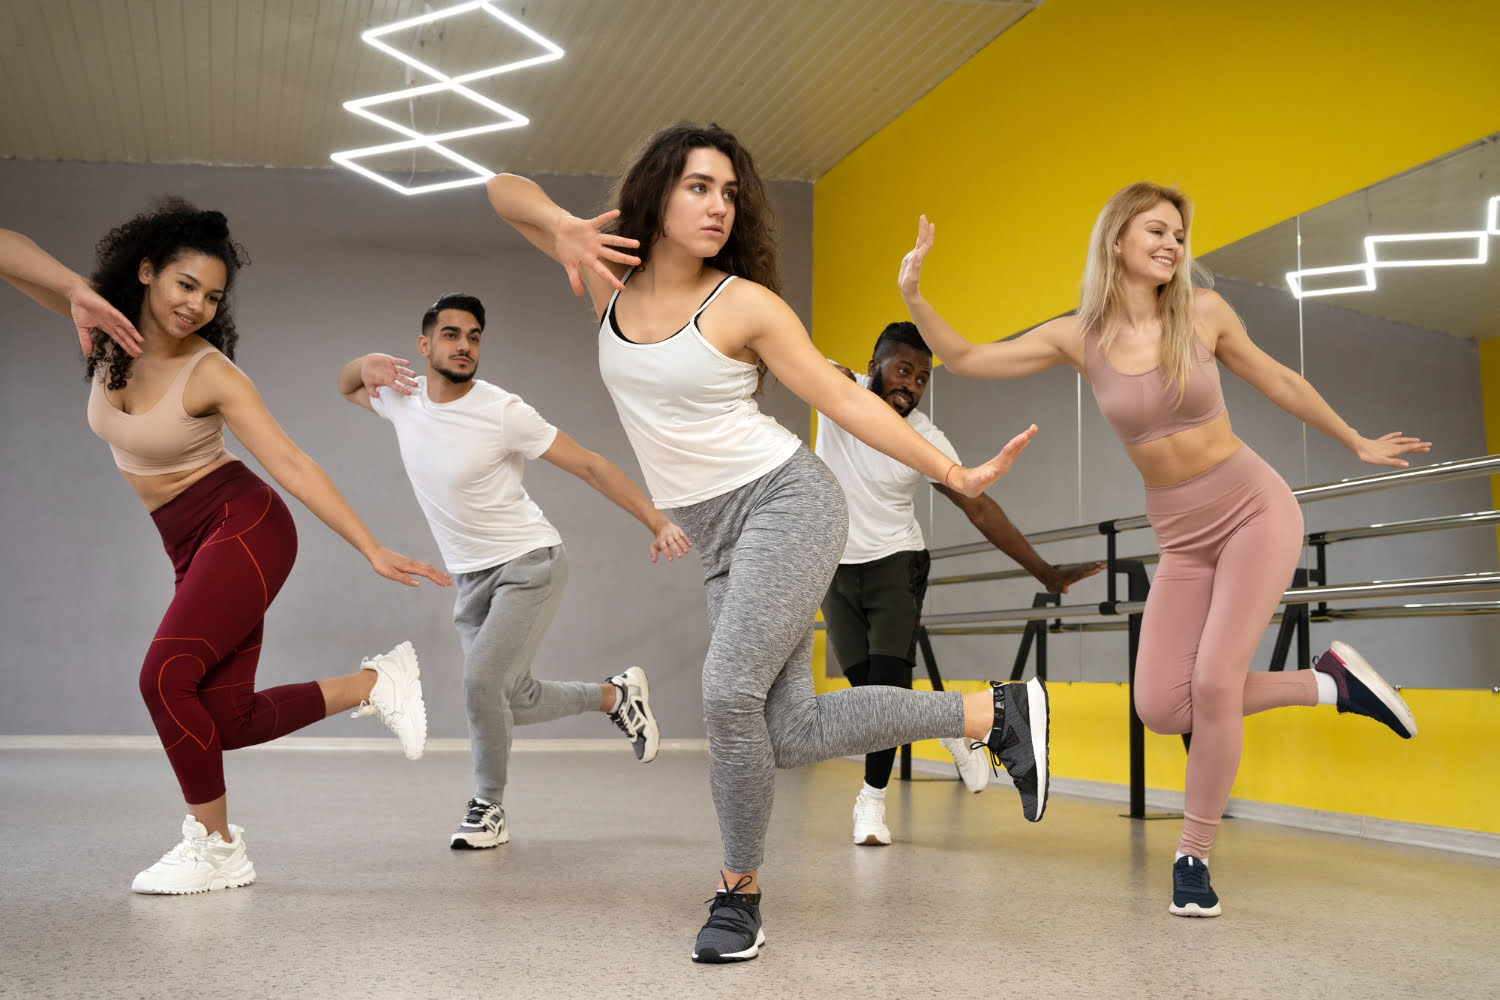 Do you want to groove, sway, and dance on the rhythm? This article is useful for all whether you are an experienced dancer or a newbie.